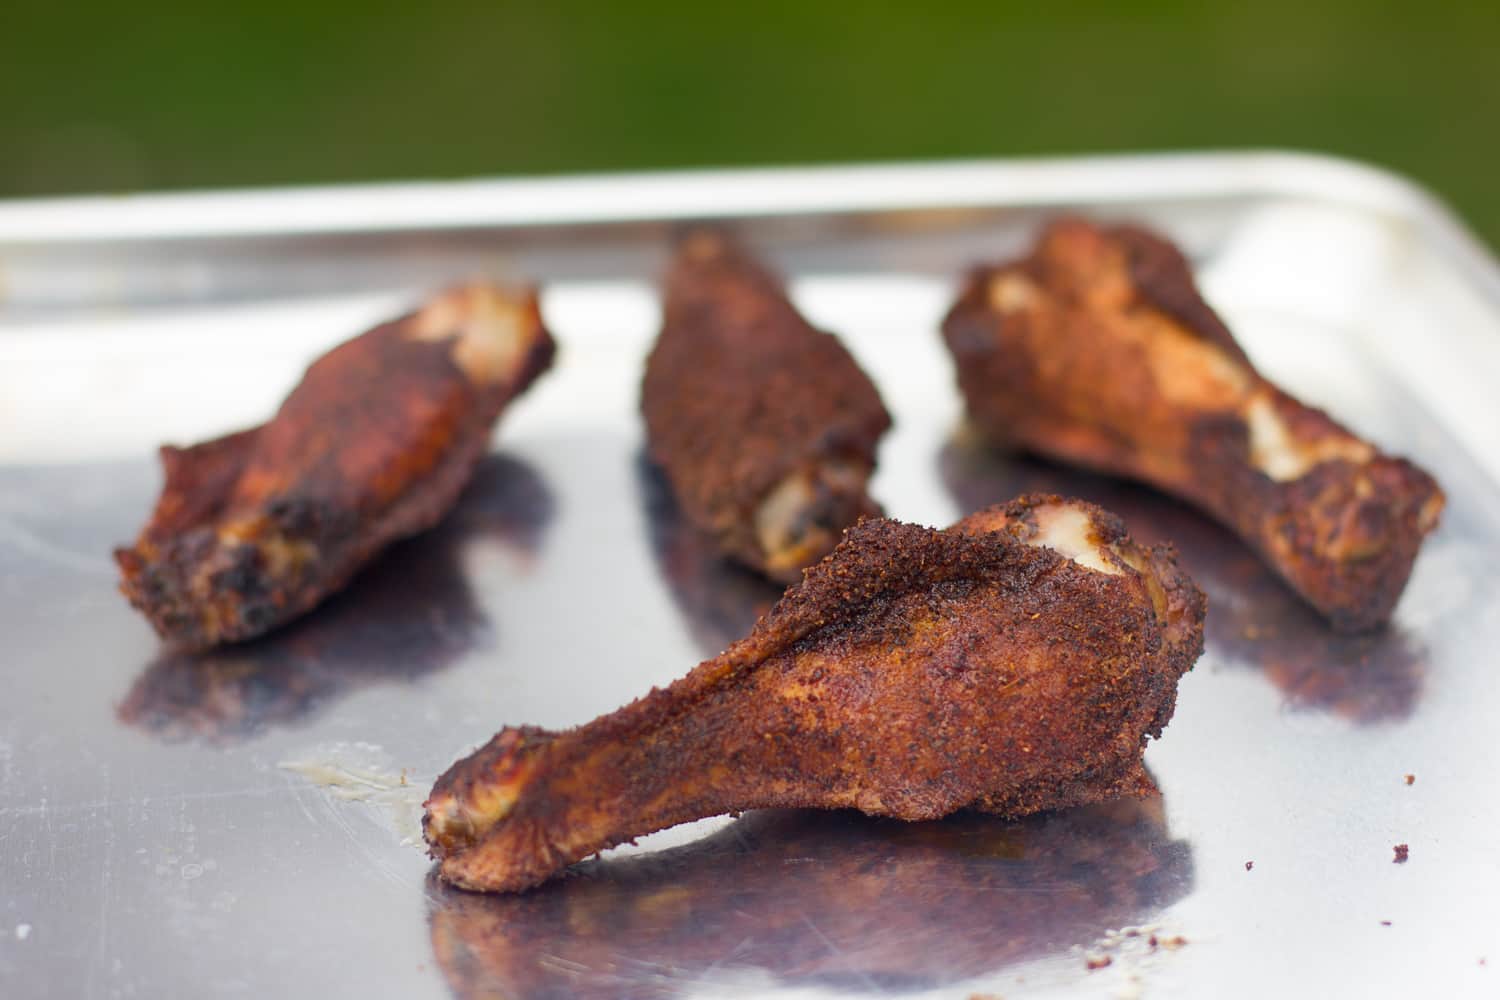 https://www.theblackpeppercorn.com/wp-content/uploads/2017/08/Smoked-Turkey-Wings-hires.jpg